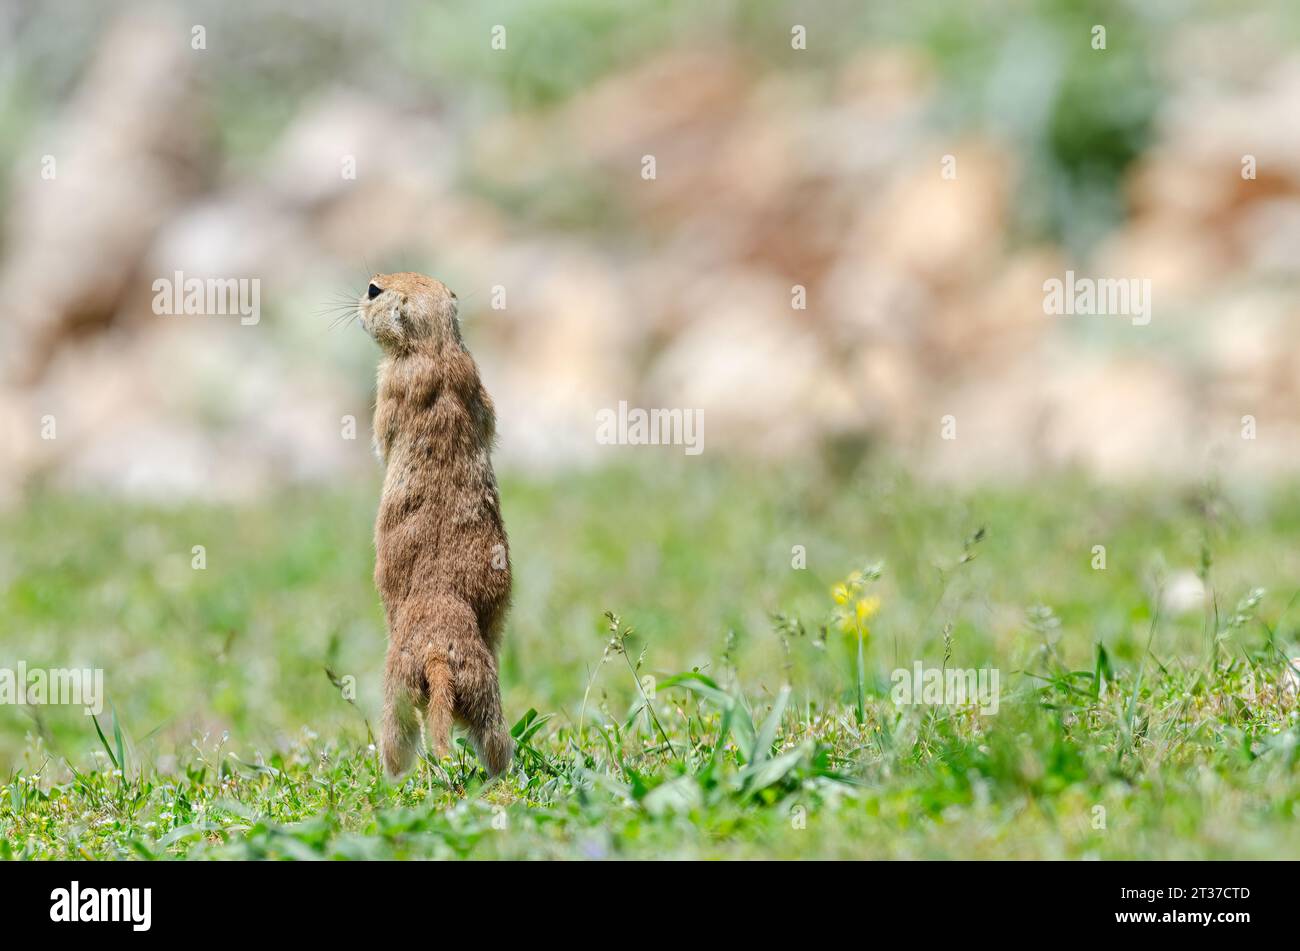 Ground squirrel with his back turned. Cute funny animal ground squirrel. Green nature background. Stock Photo